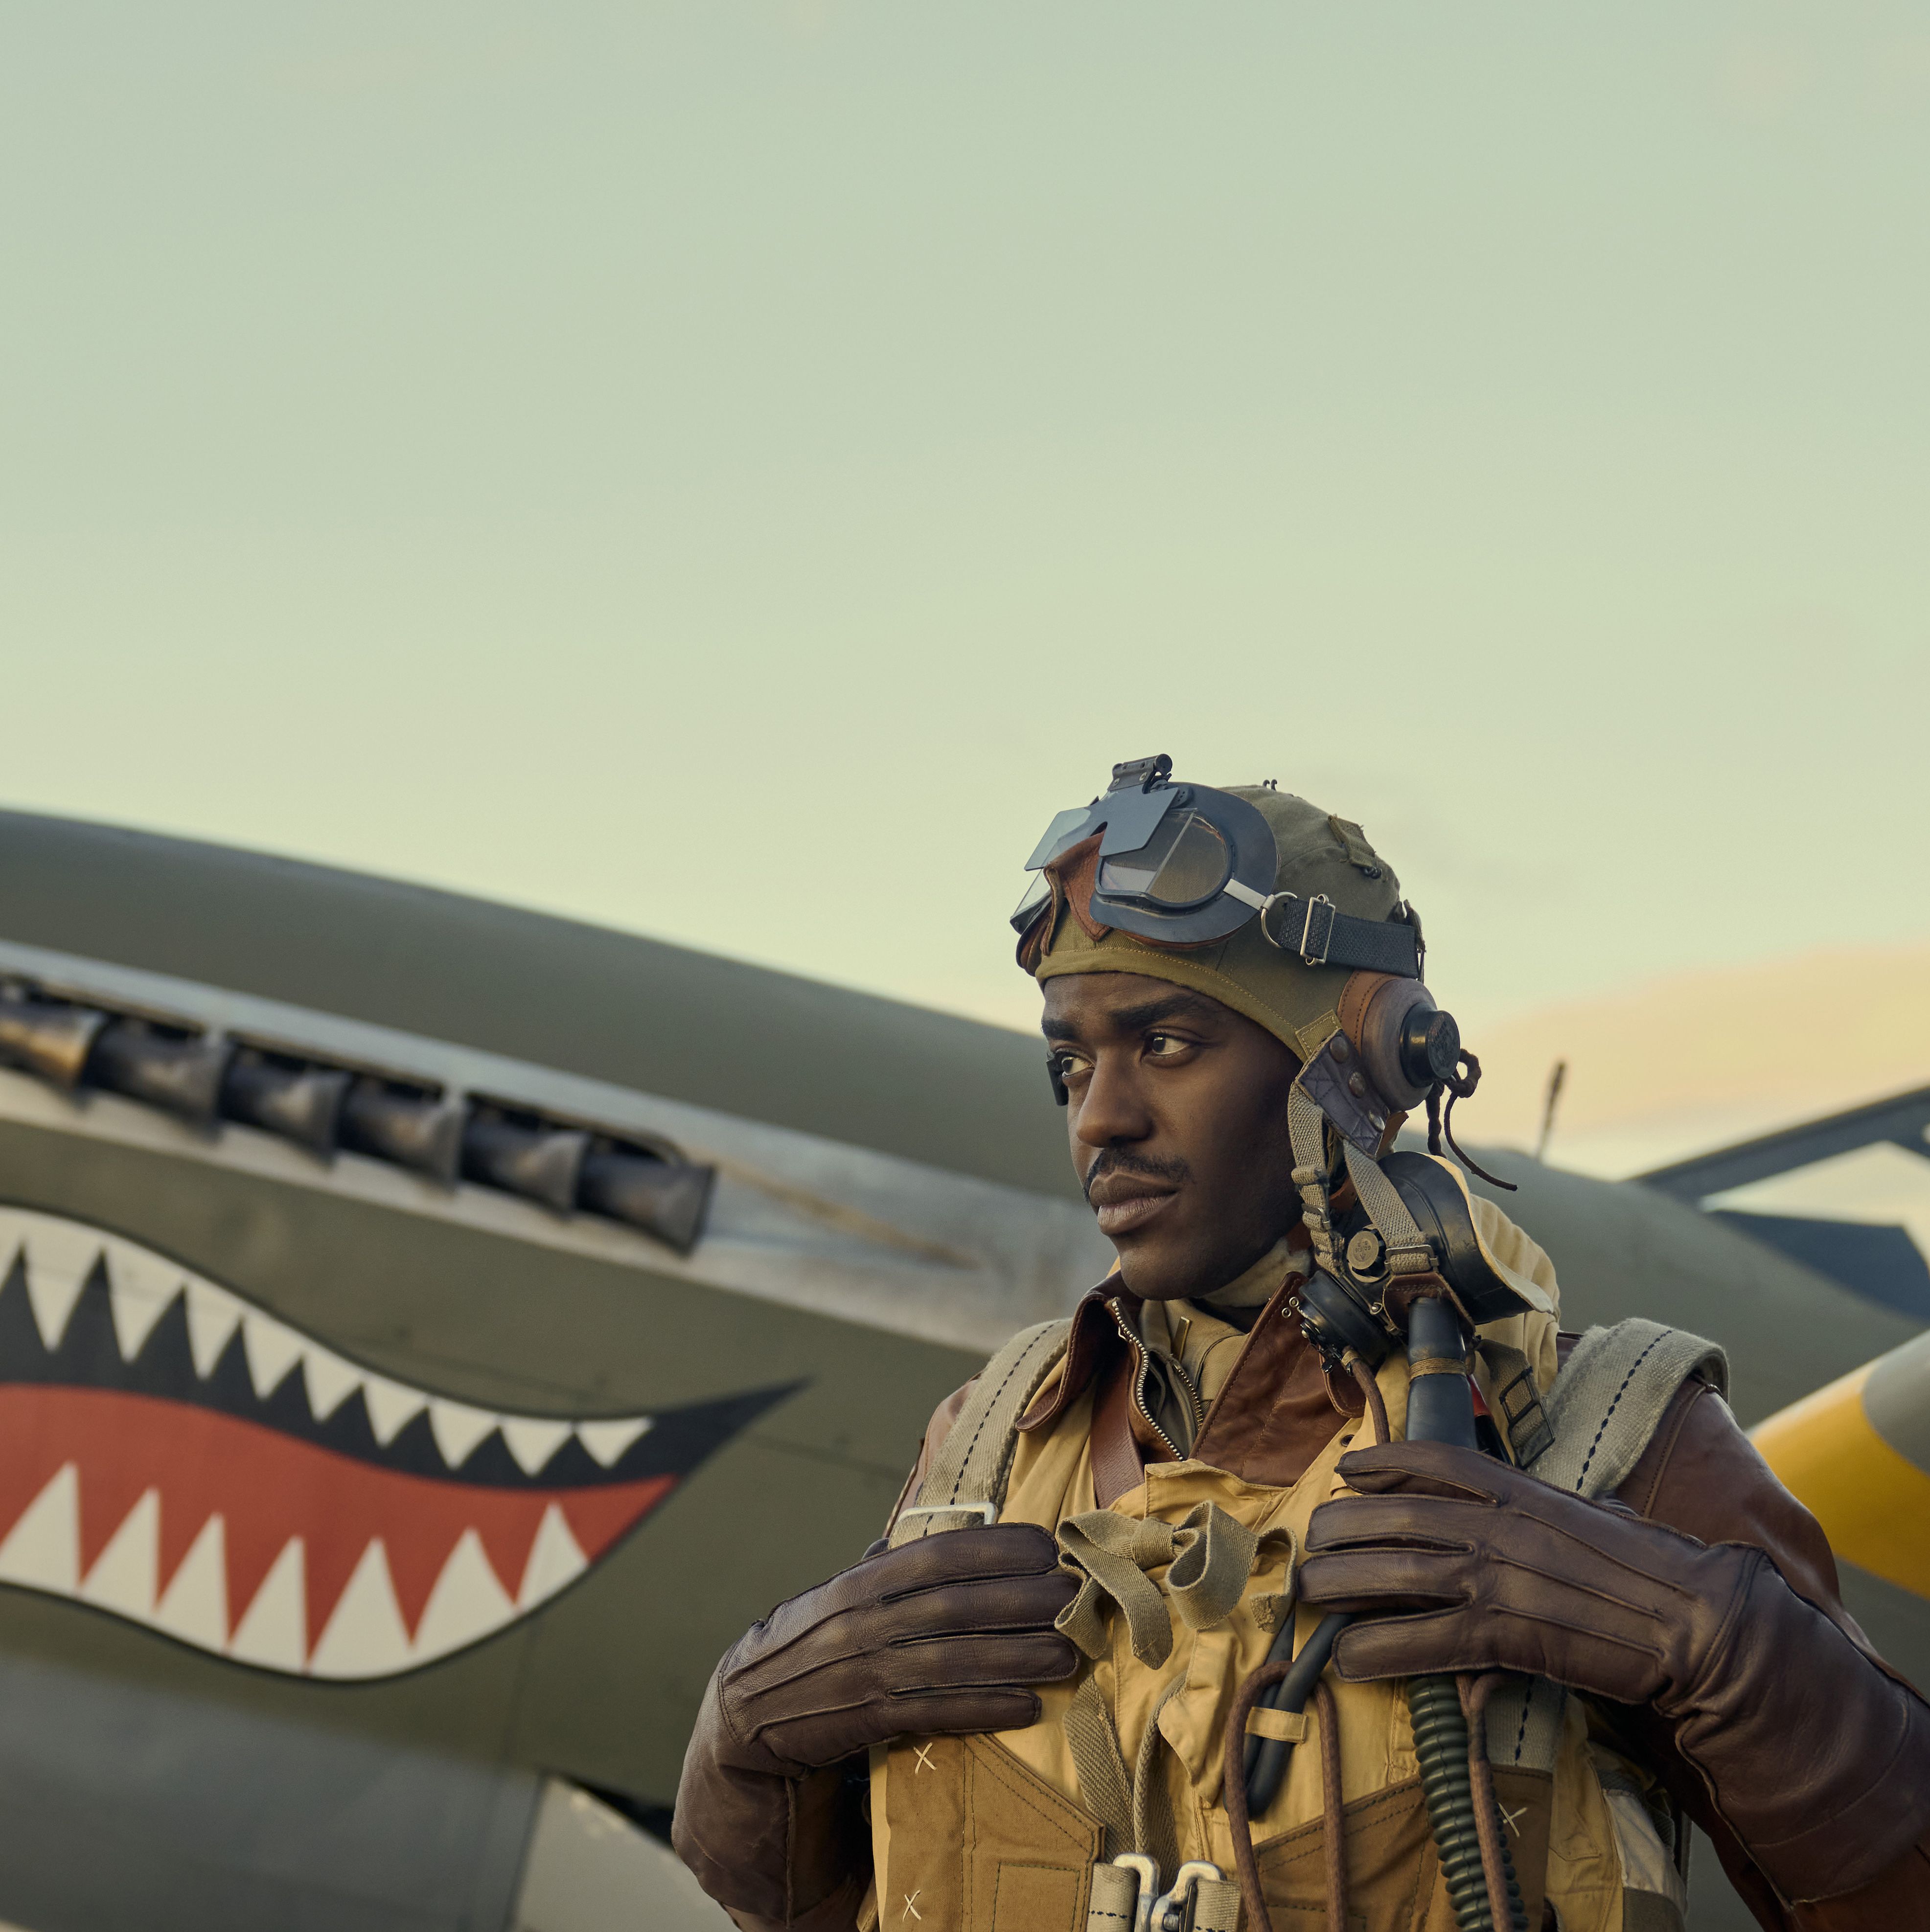 Masters of the Air Episode 8 Introduces the Legendary Tuskegee Airmen